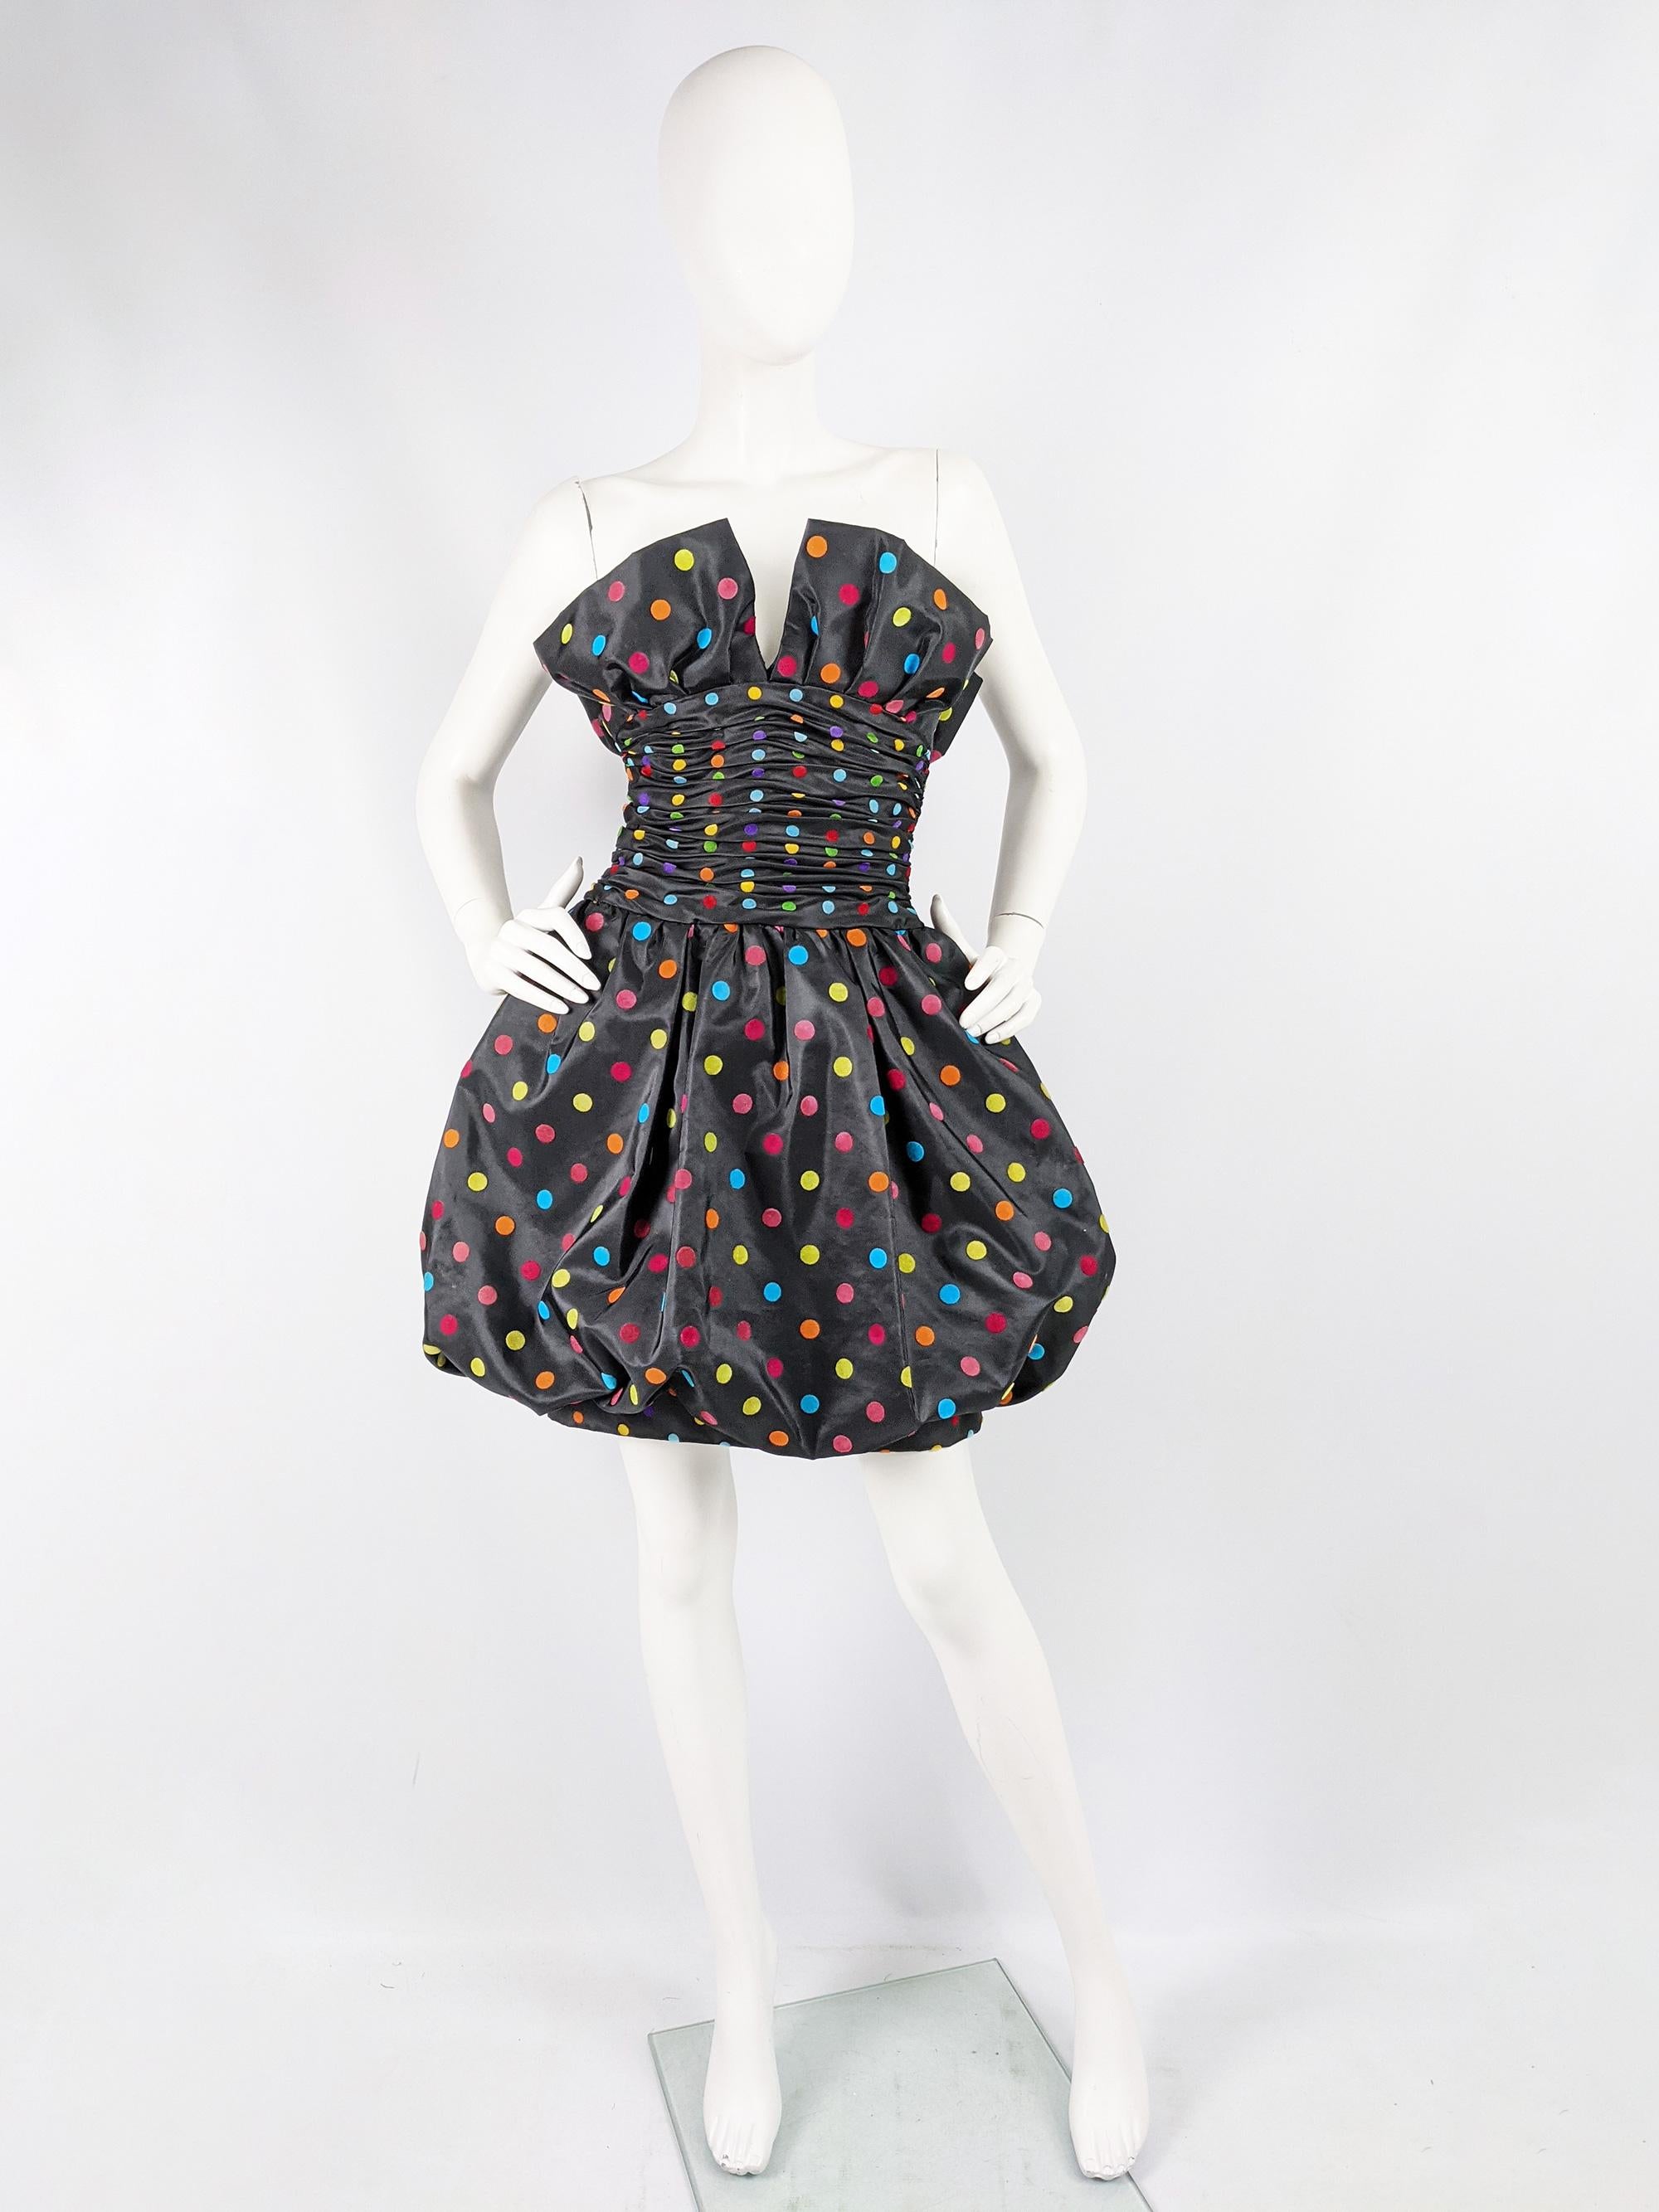 A fabulous vintage womens vintage womens evening dress from the 80s by luxury fashion designer, Nina Ricci. In a black taffeta with multicoloured flocket velvet polka dots throughout and a puffball skirt. 

Size: Not indicated; fits like a modern